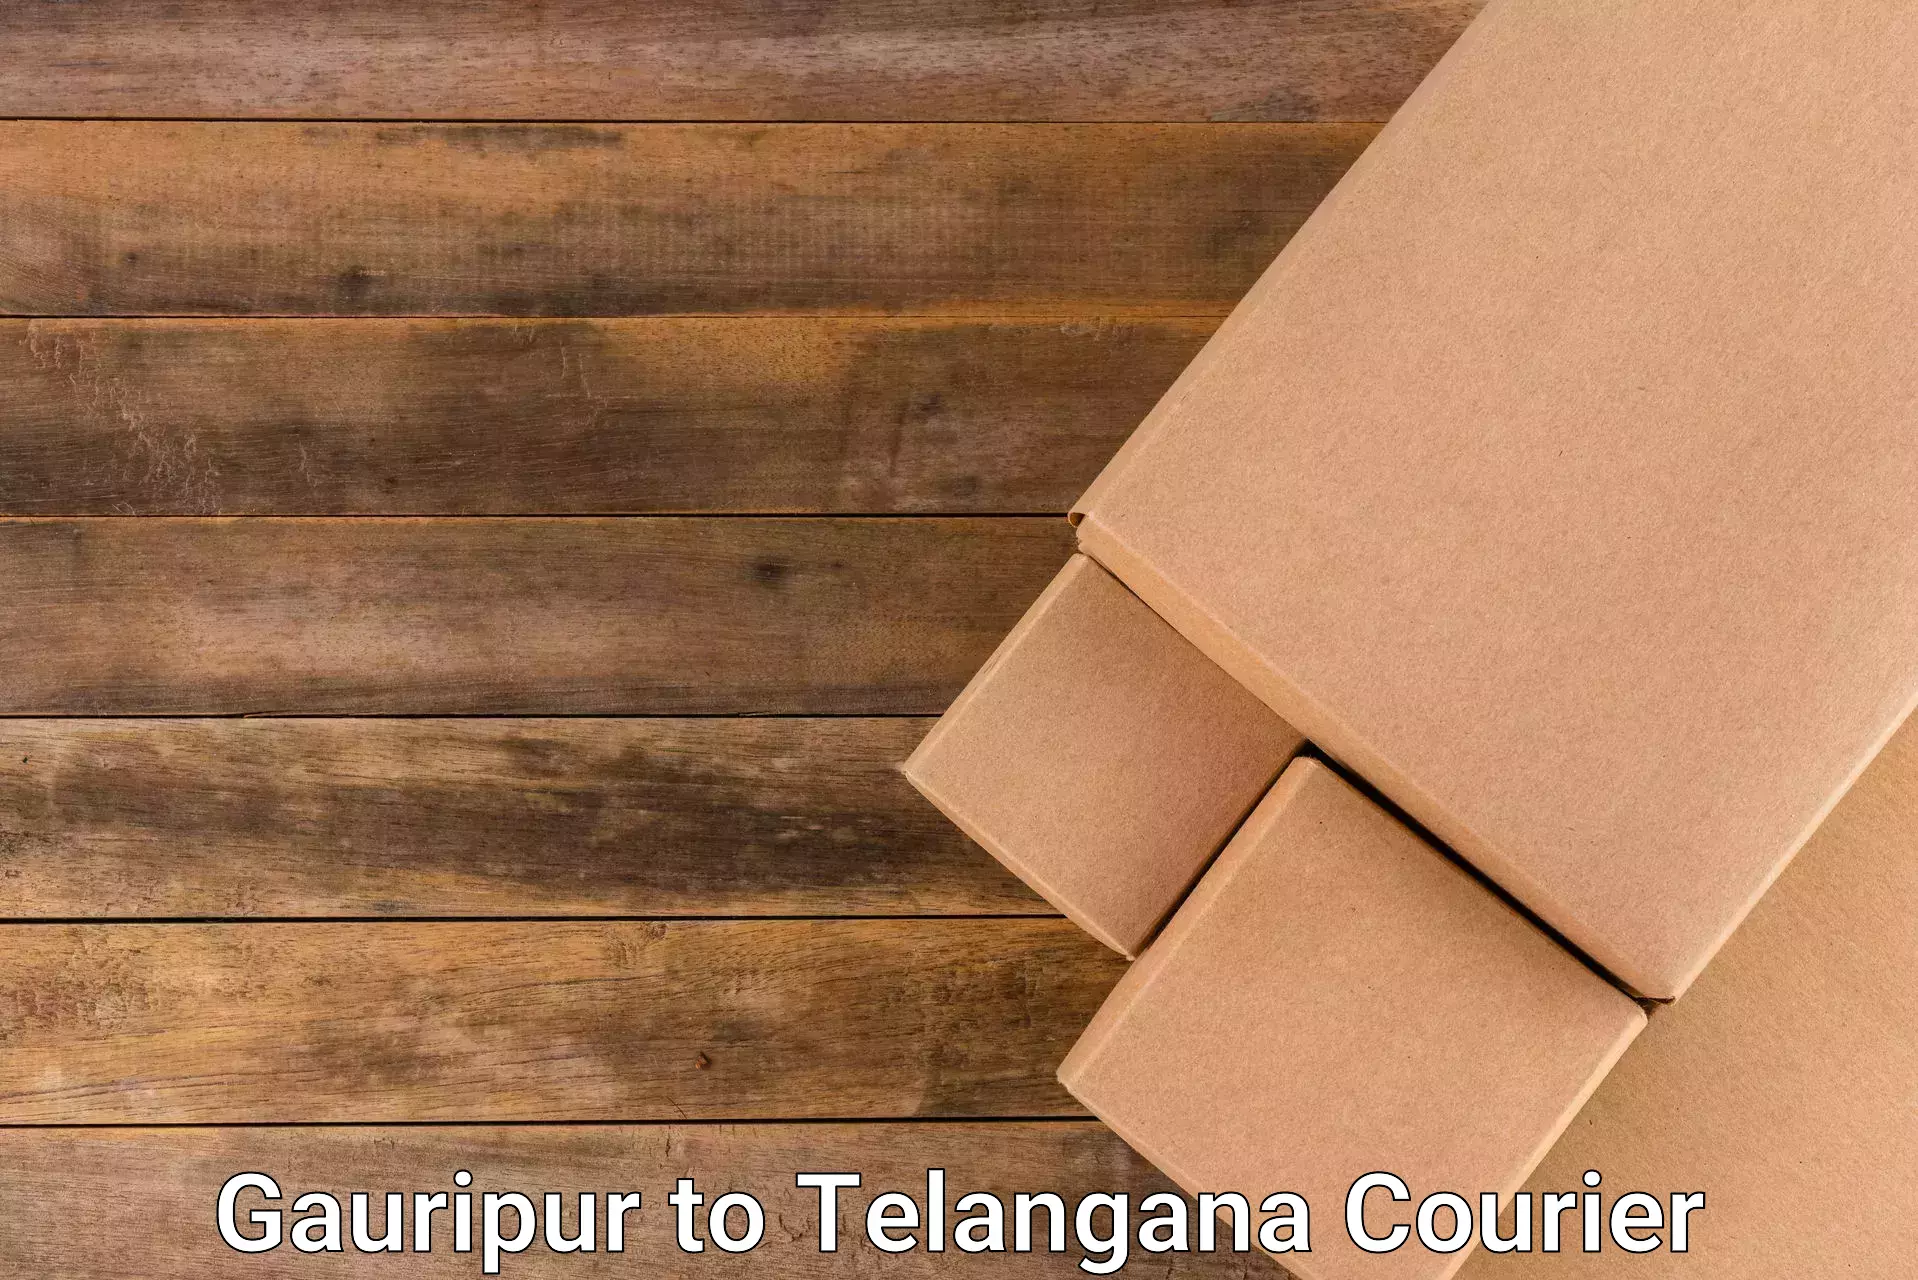 Global courier networks Gauripur to Balanagar